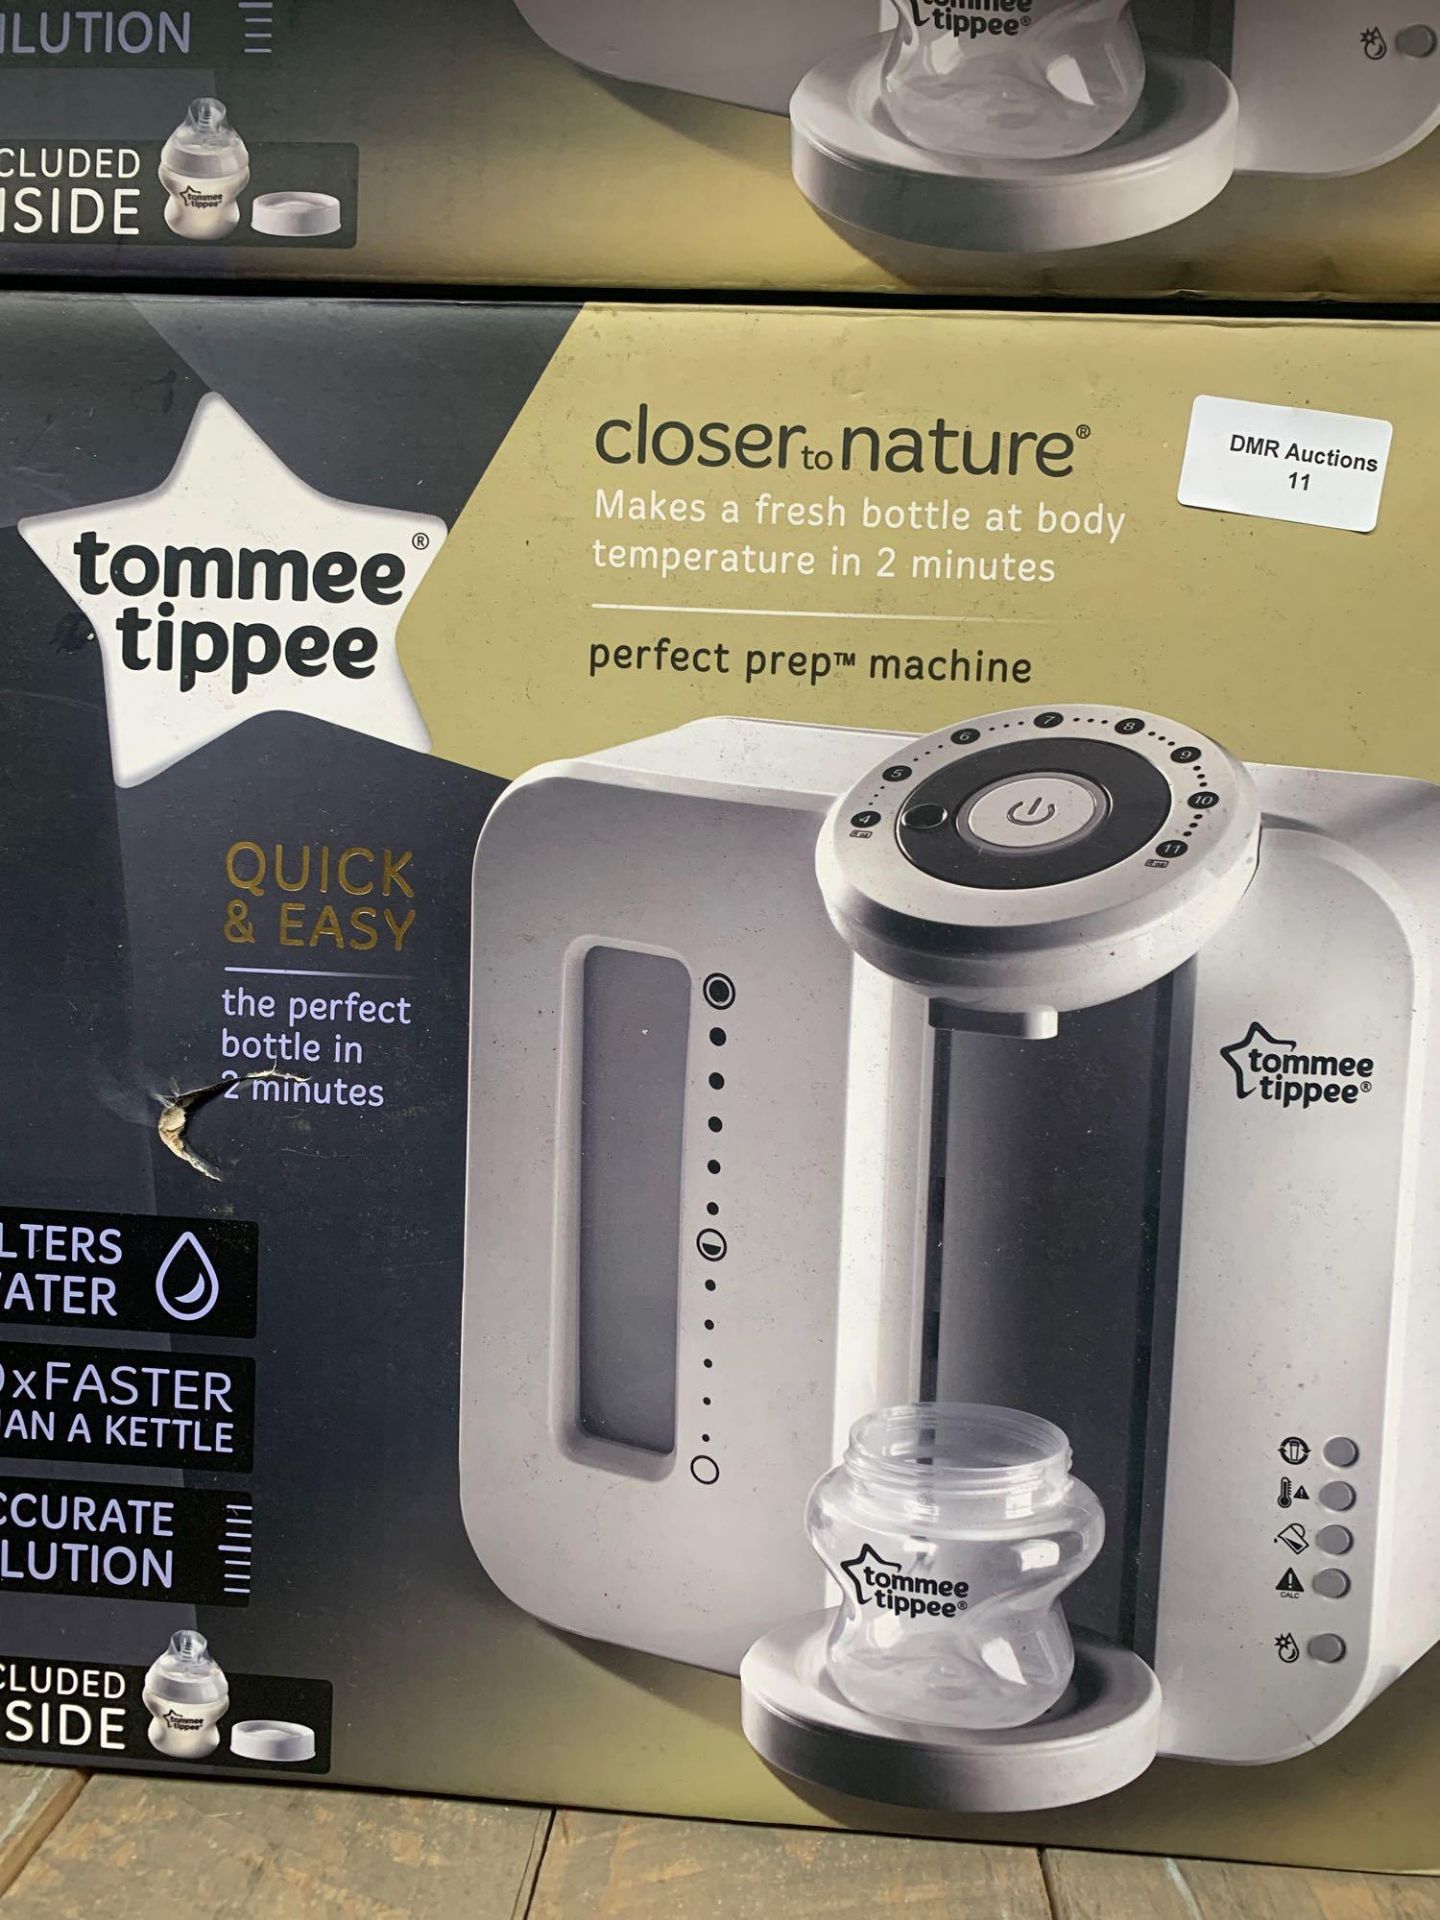 1 LOT TO CONTAIN 1 TOMMEE TIPPEE CLOSE TO NATURE PERFECT PREP MACHINE / RRP £80.00 (THIS ITEM IS